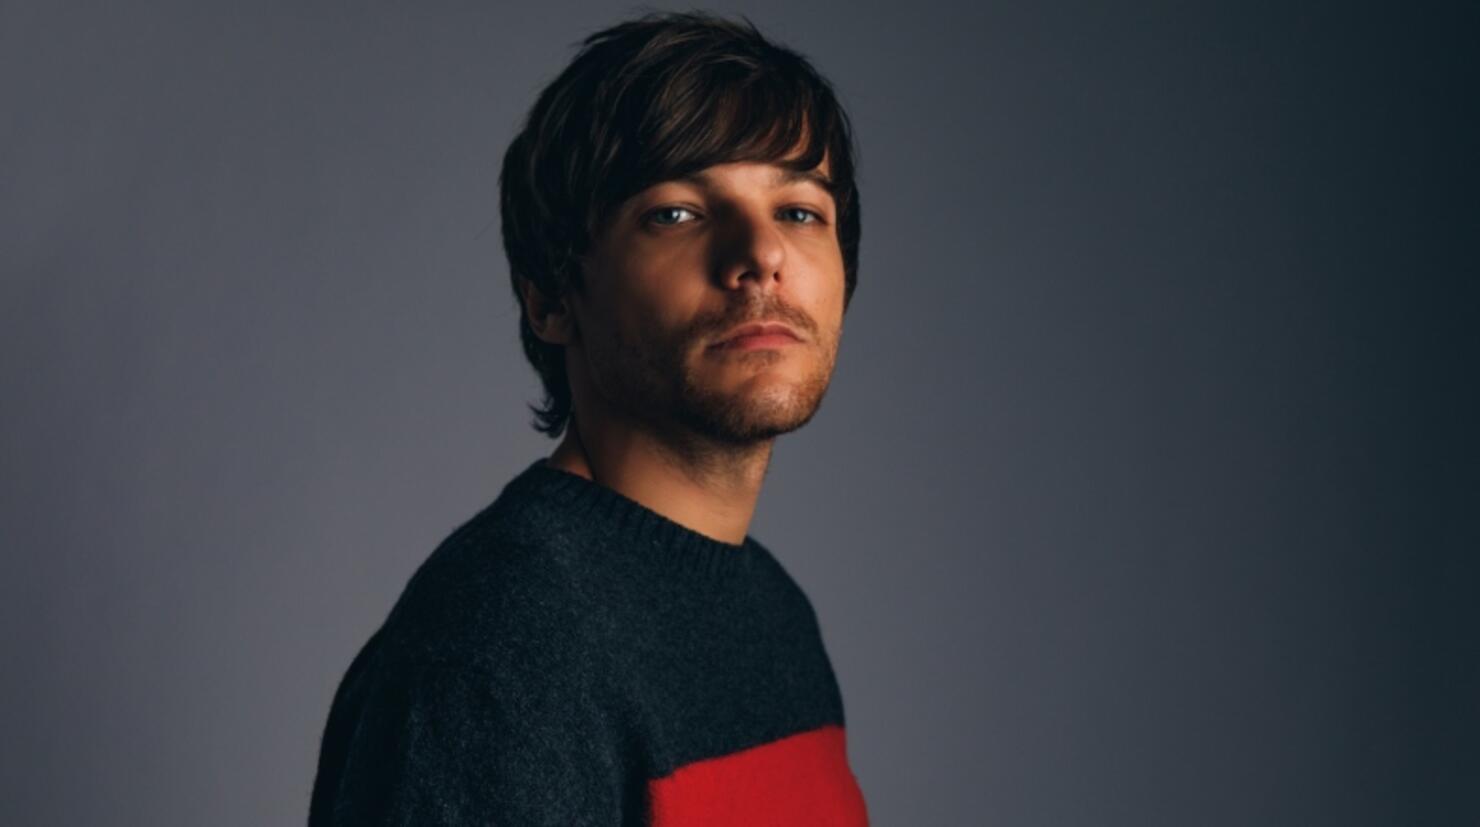 Louis Tomlinson Releases Album Walls, His Debut After One Direction